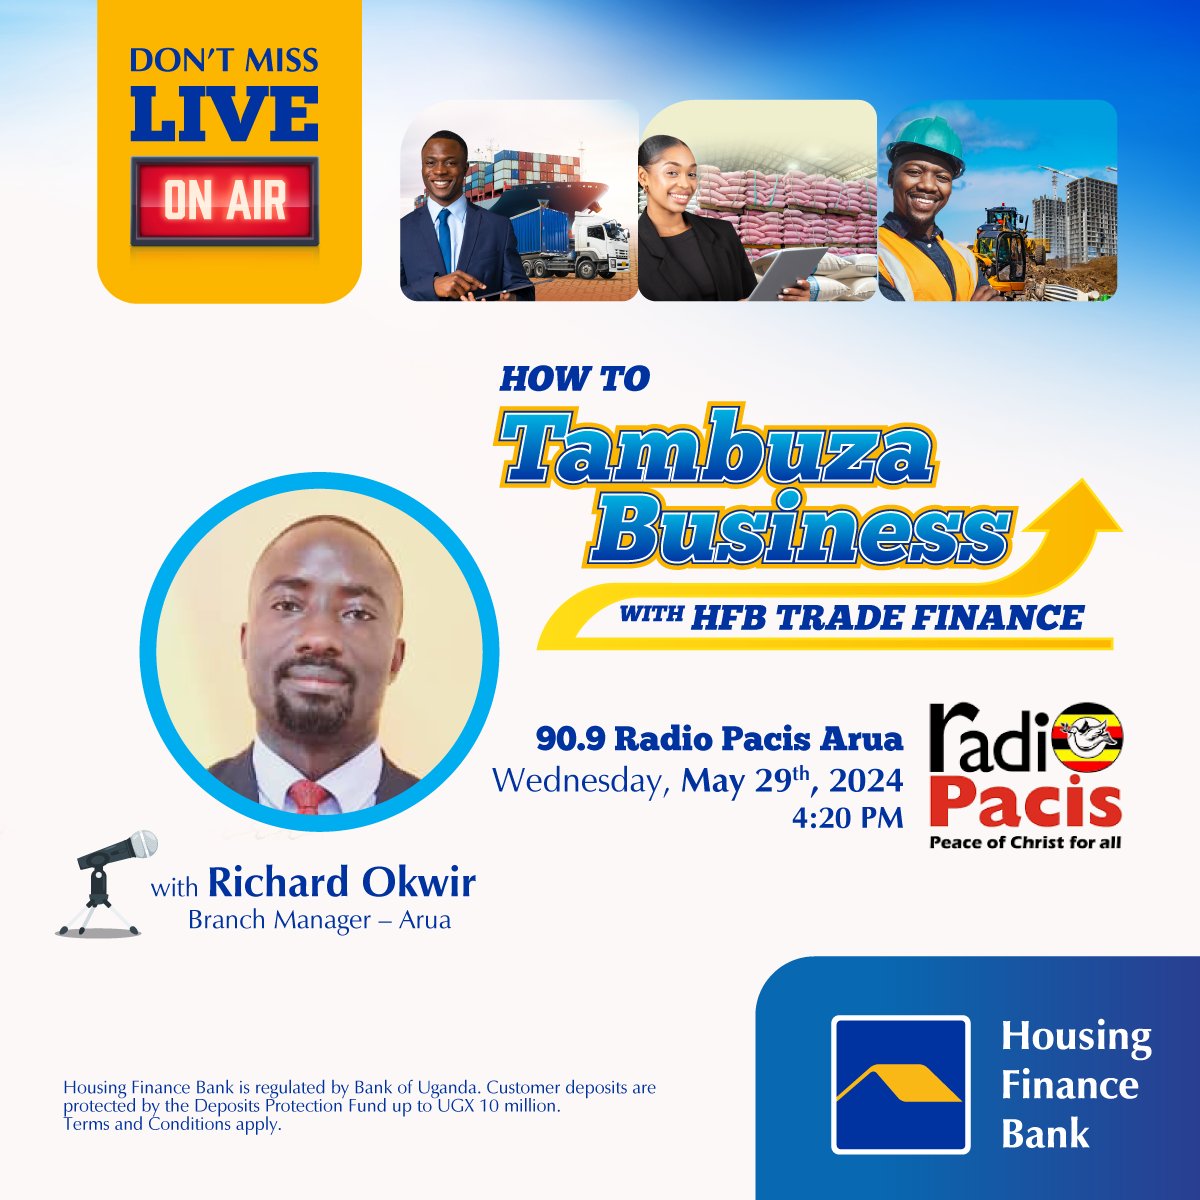 Tune in live today Wednesday, 29th May 2024 at 4:20 PM on 90.9 Radio Pacis Arua, as our Branch Manager, Arua, Richard Okwir, discusses how you can elevate your business with the HFB Trade Finance solutions. #WeMakeItEasy